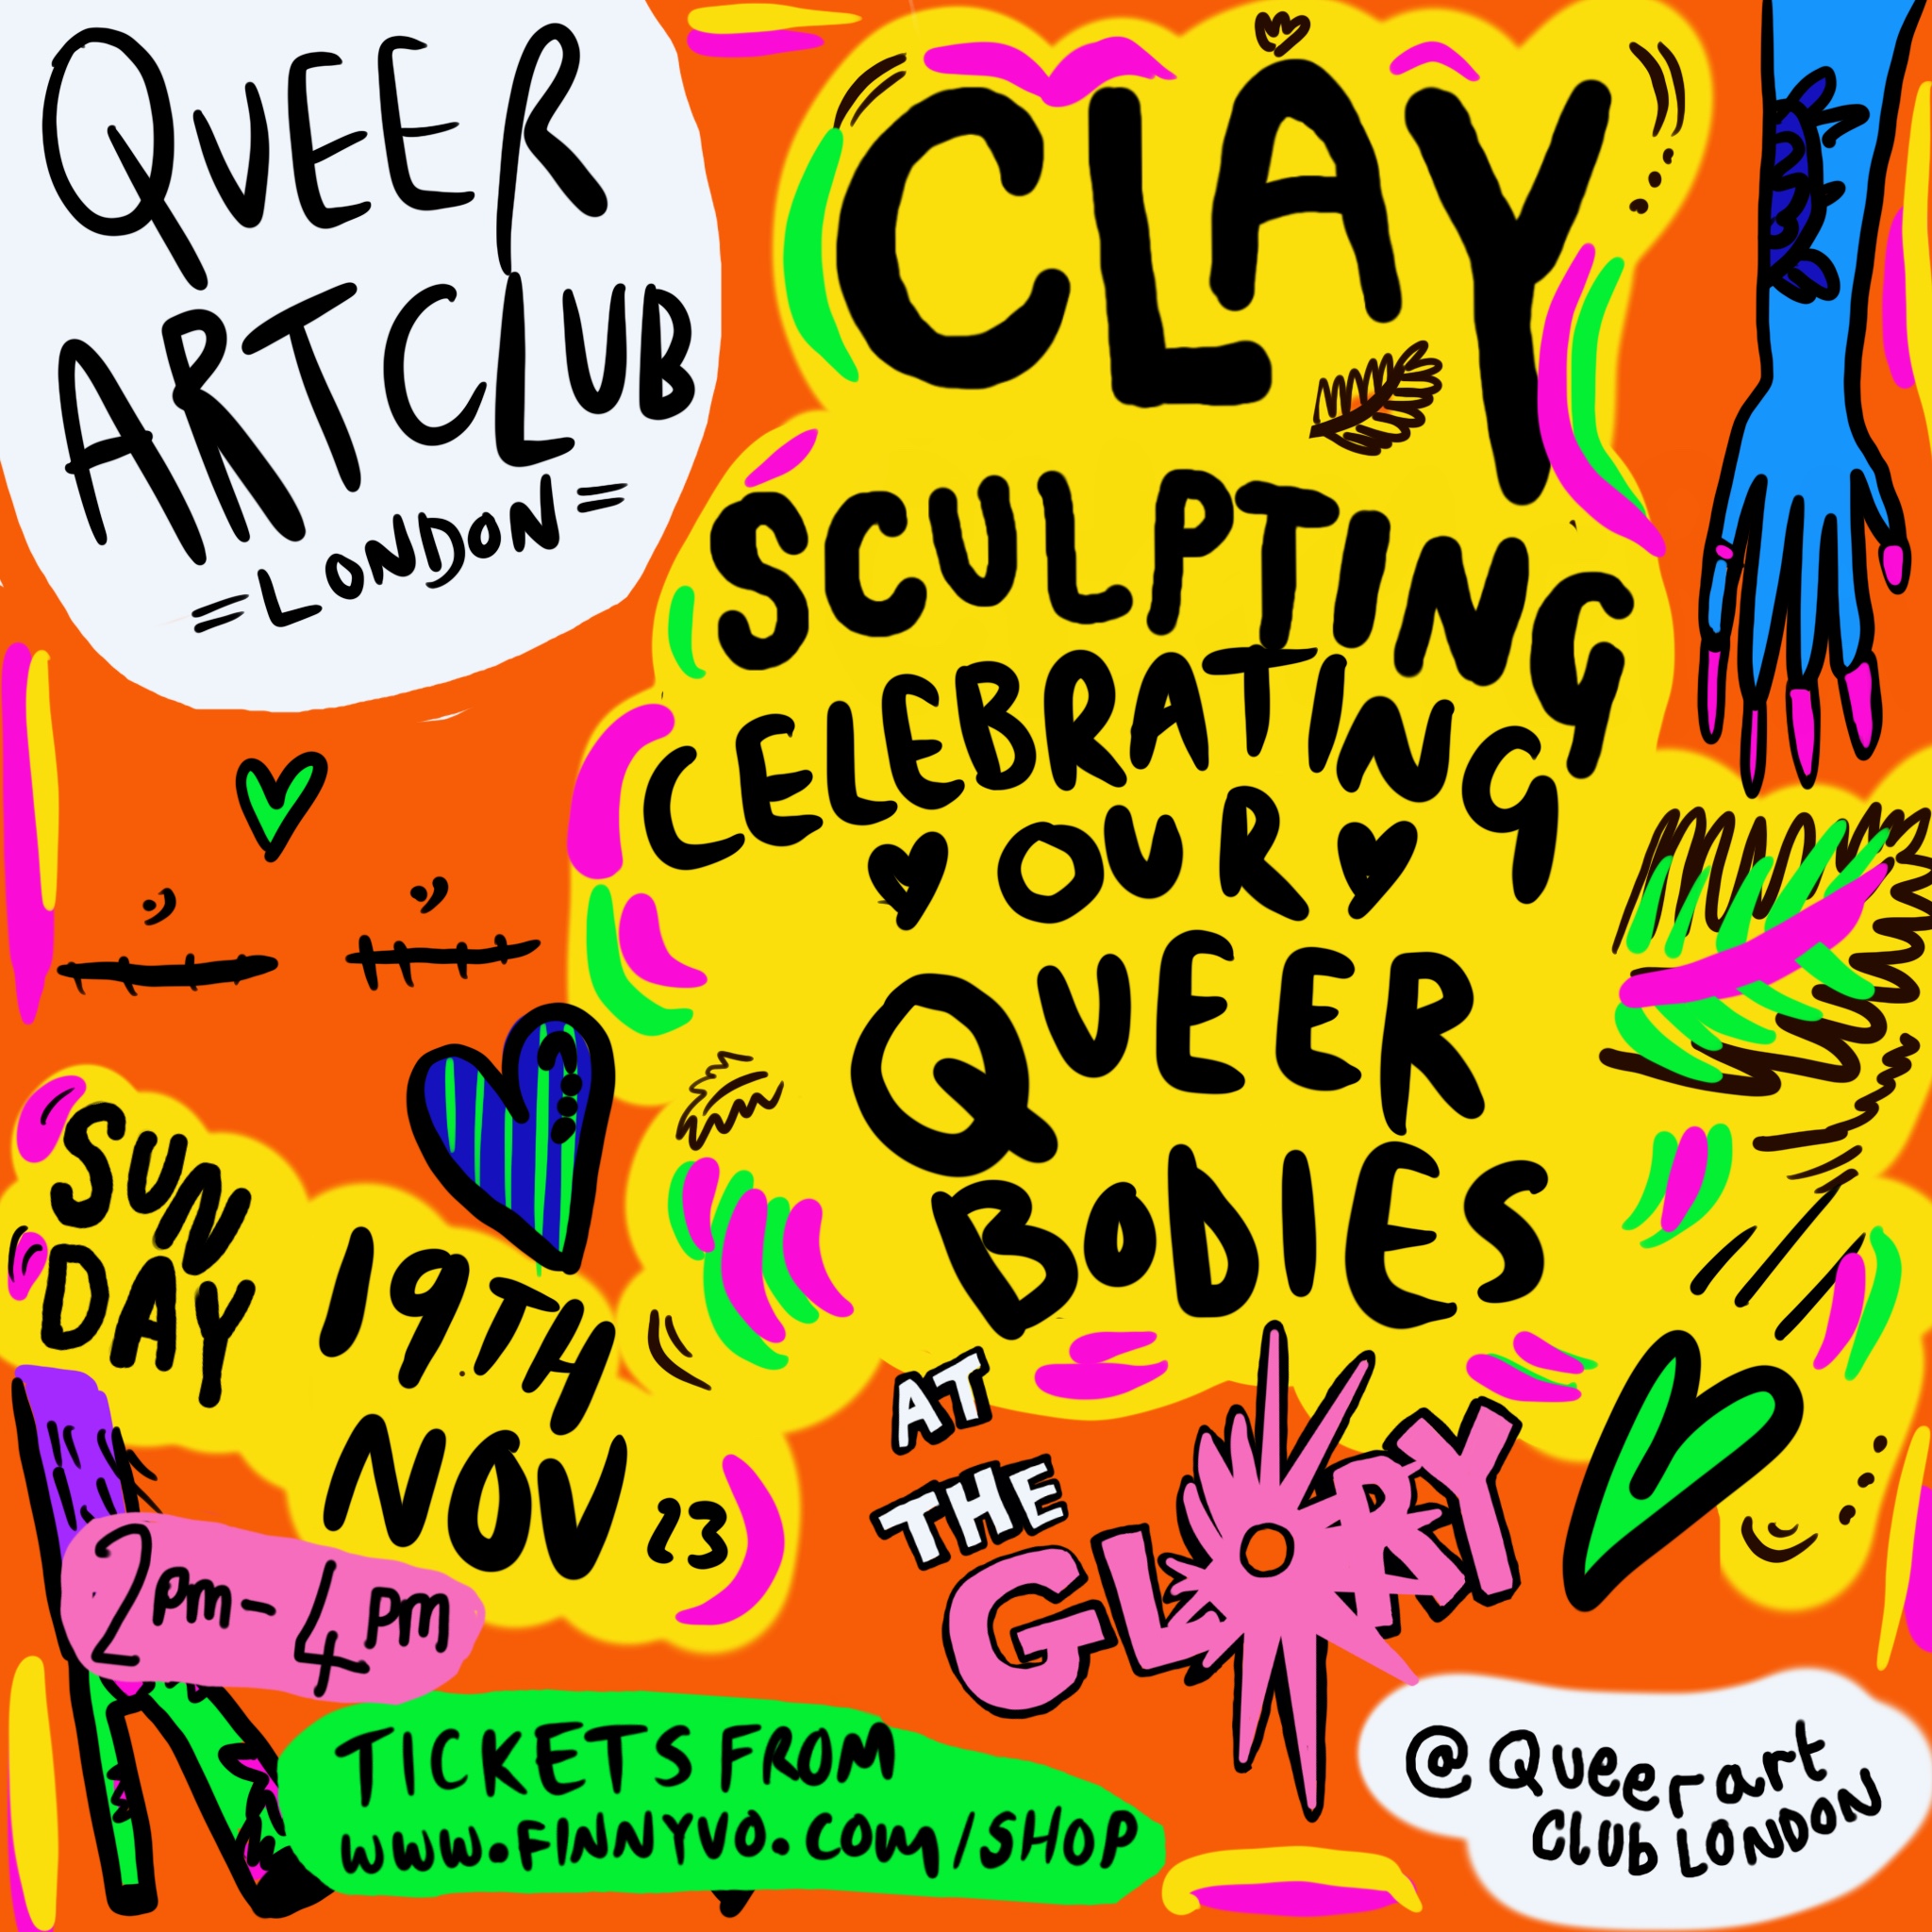 Clay Sculpture, Celebrating our Queer Bodies  – Queer Art Club with Finn Yvo